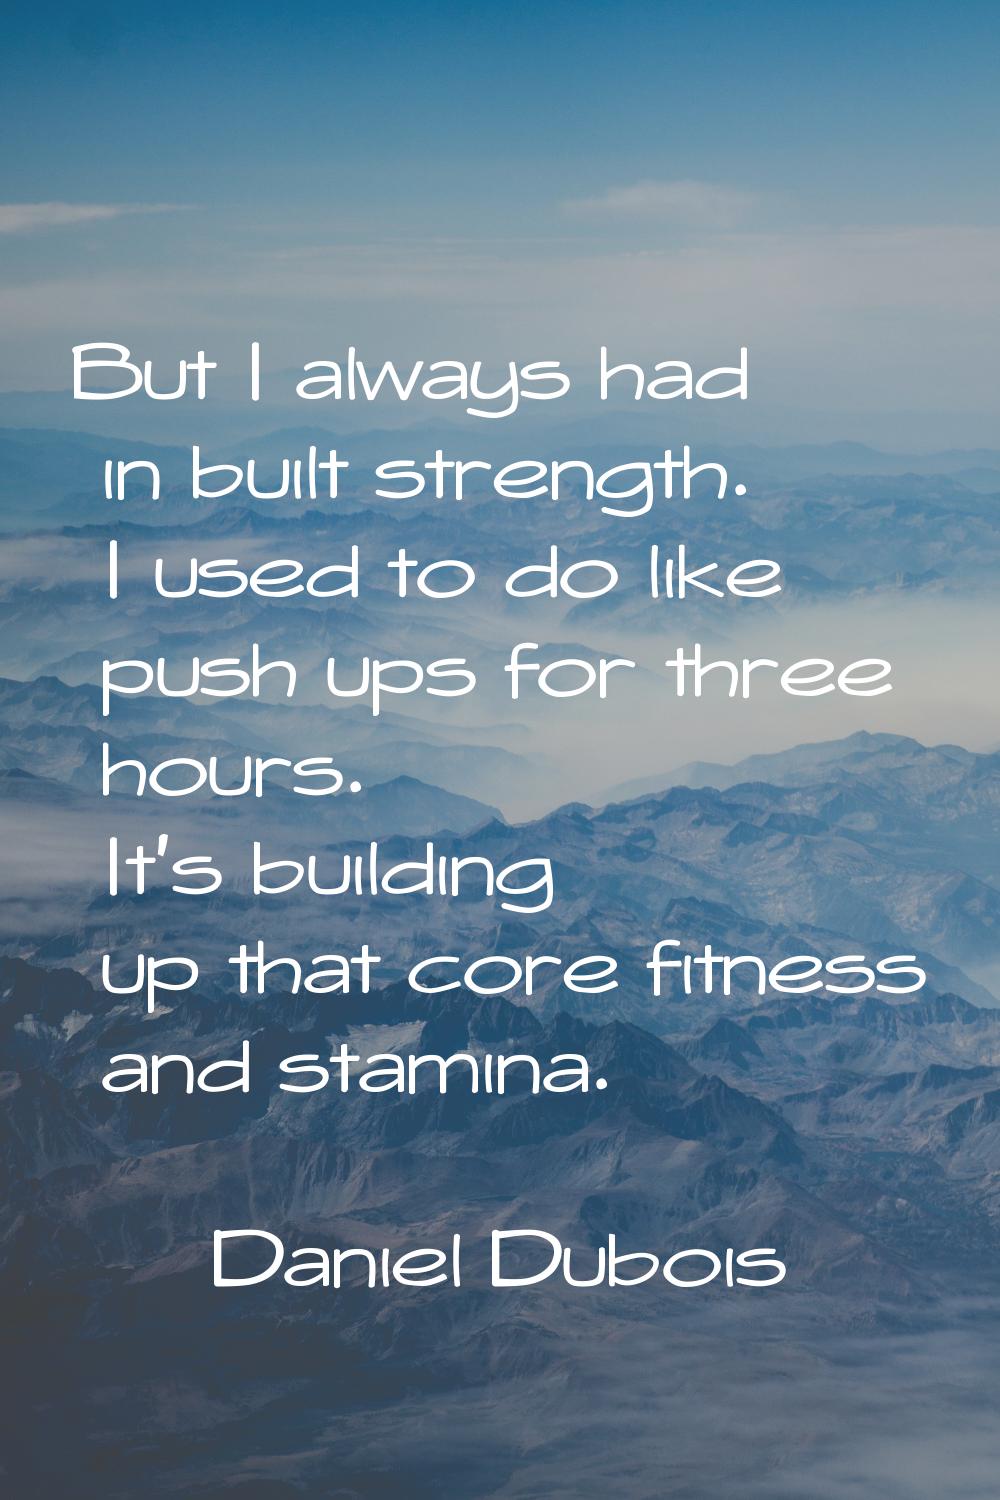 But I always had in built strength. I used to do like push ups for three hours. It's building up th